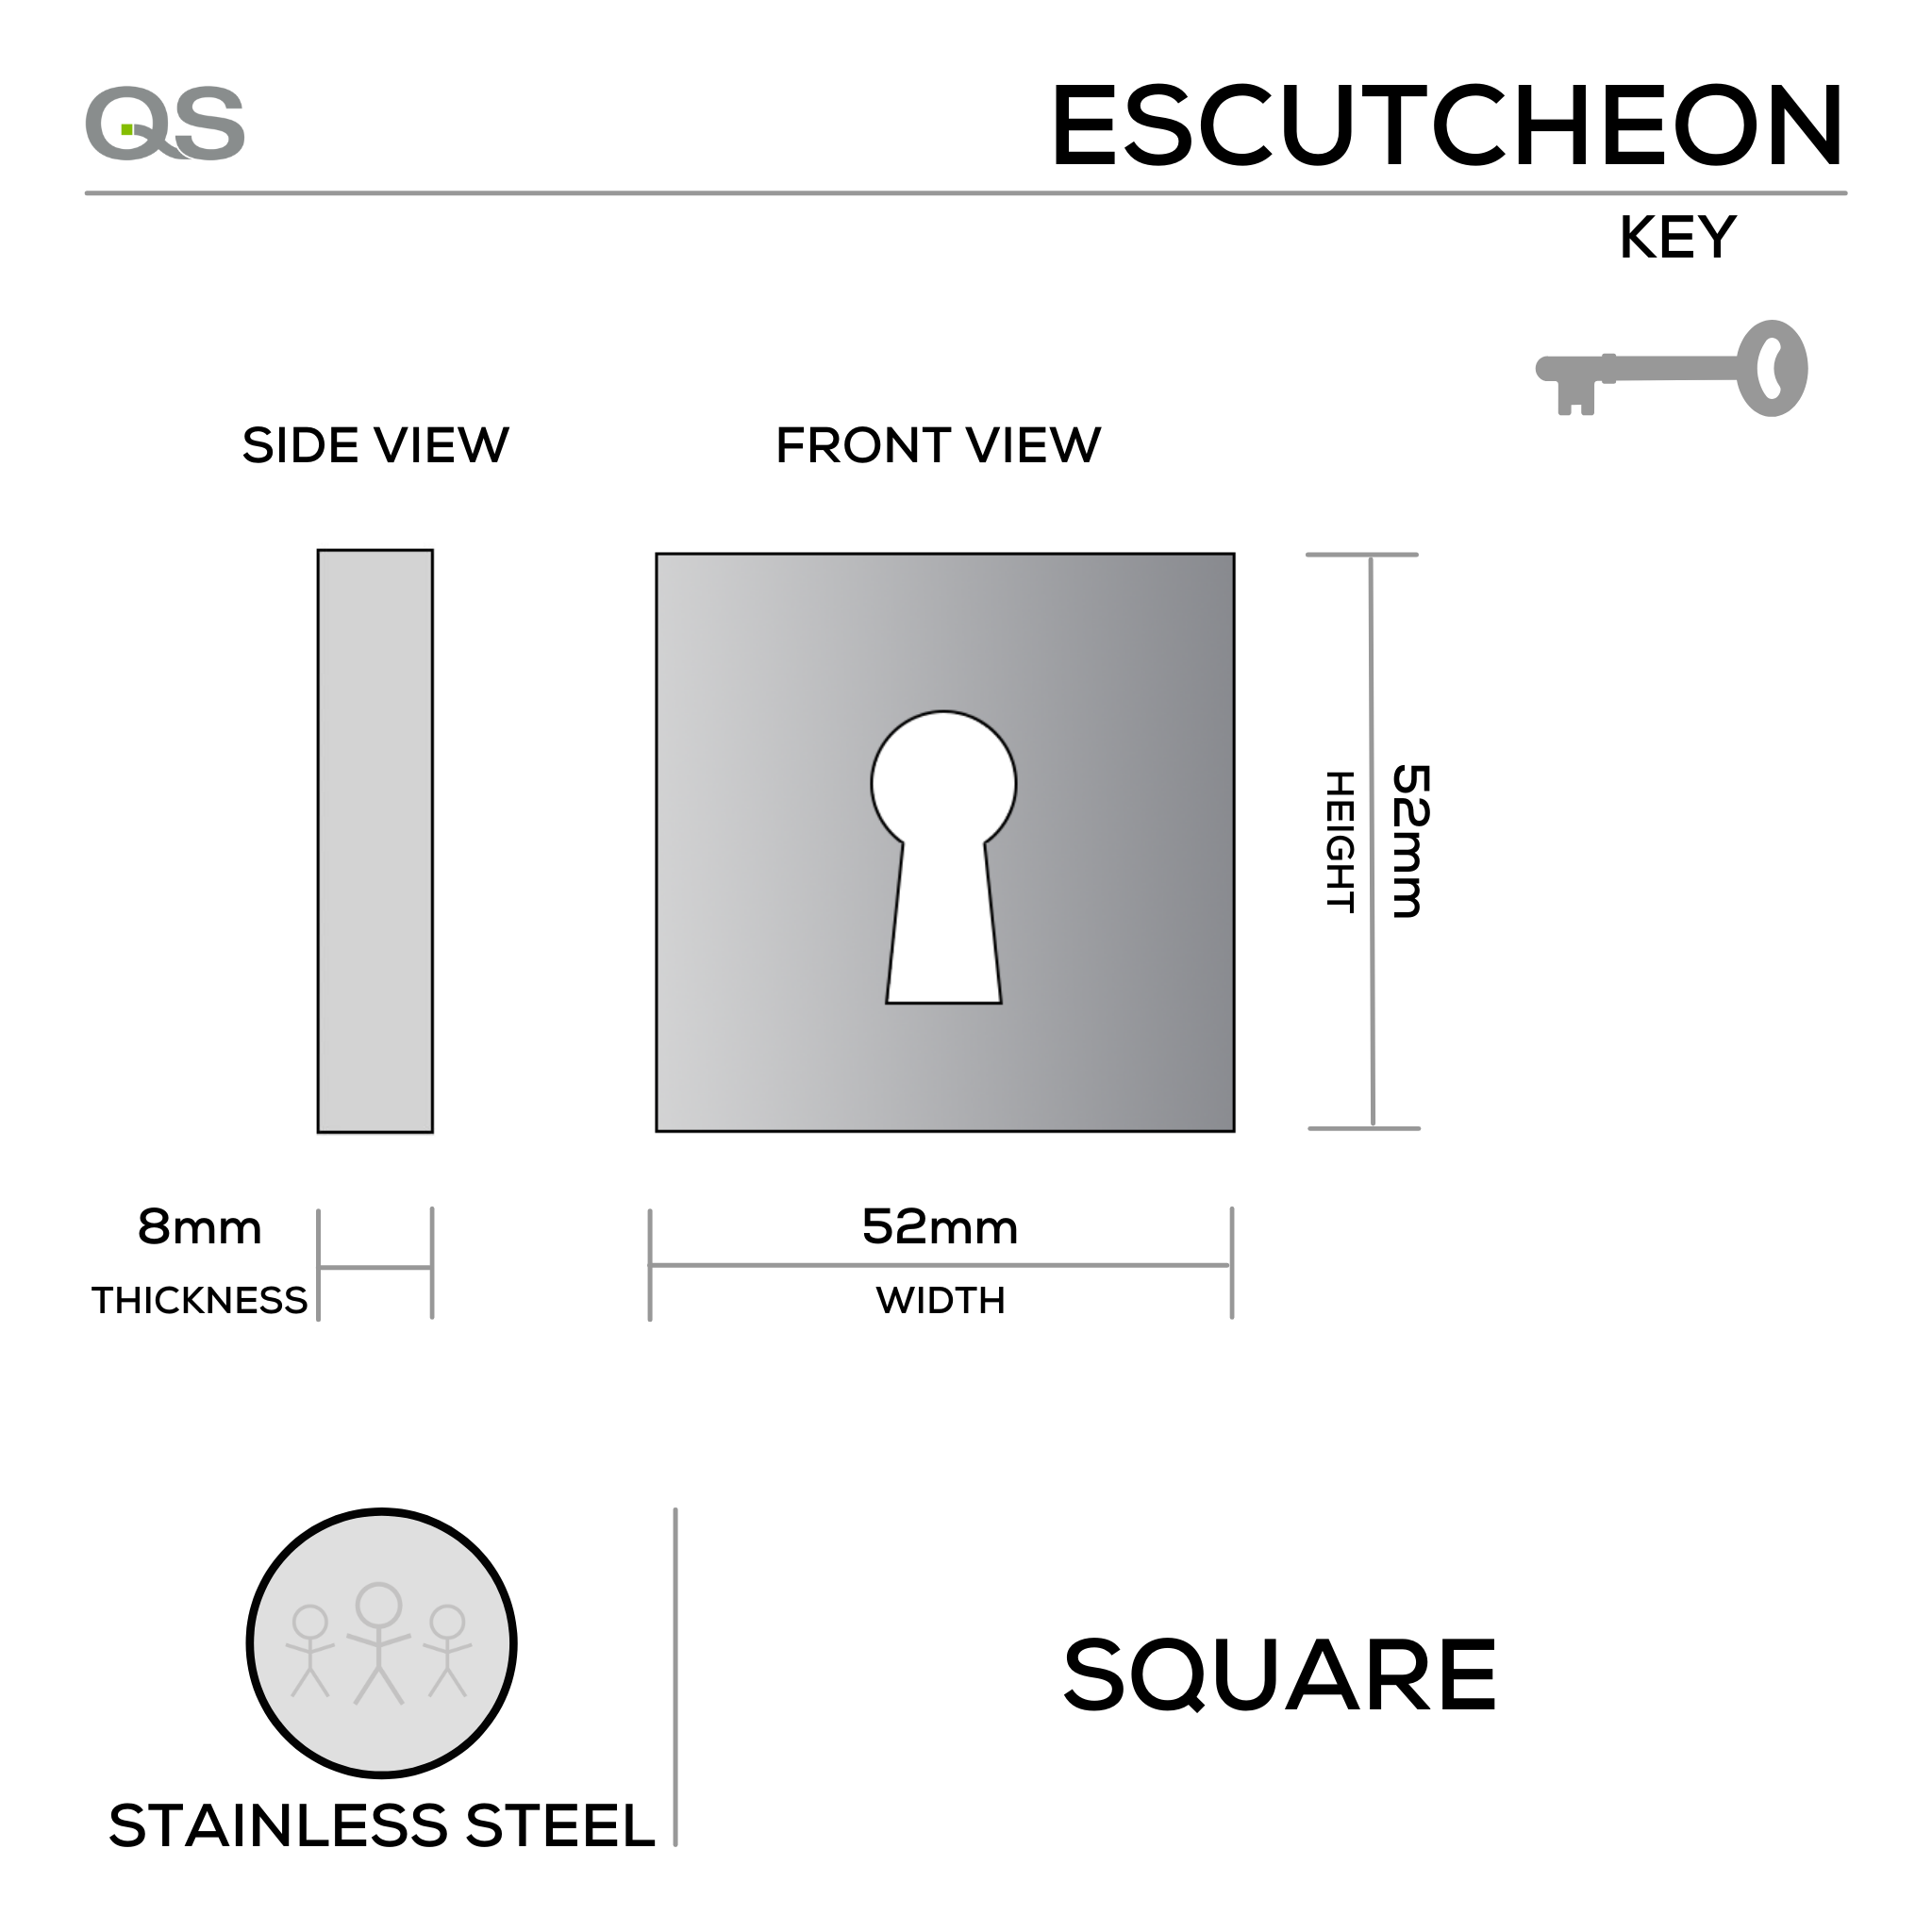 QS4472, Keyhole Escutcheon, Square Rose, 52mm (h) x 52mm (w) x 8mm (t), Stainless Steel, QS